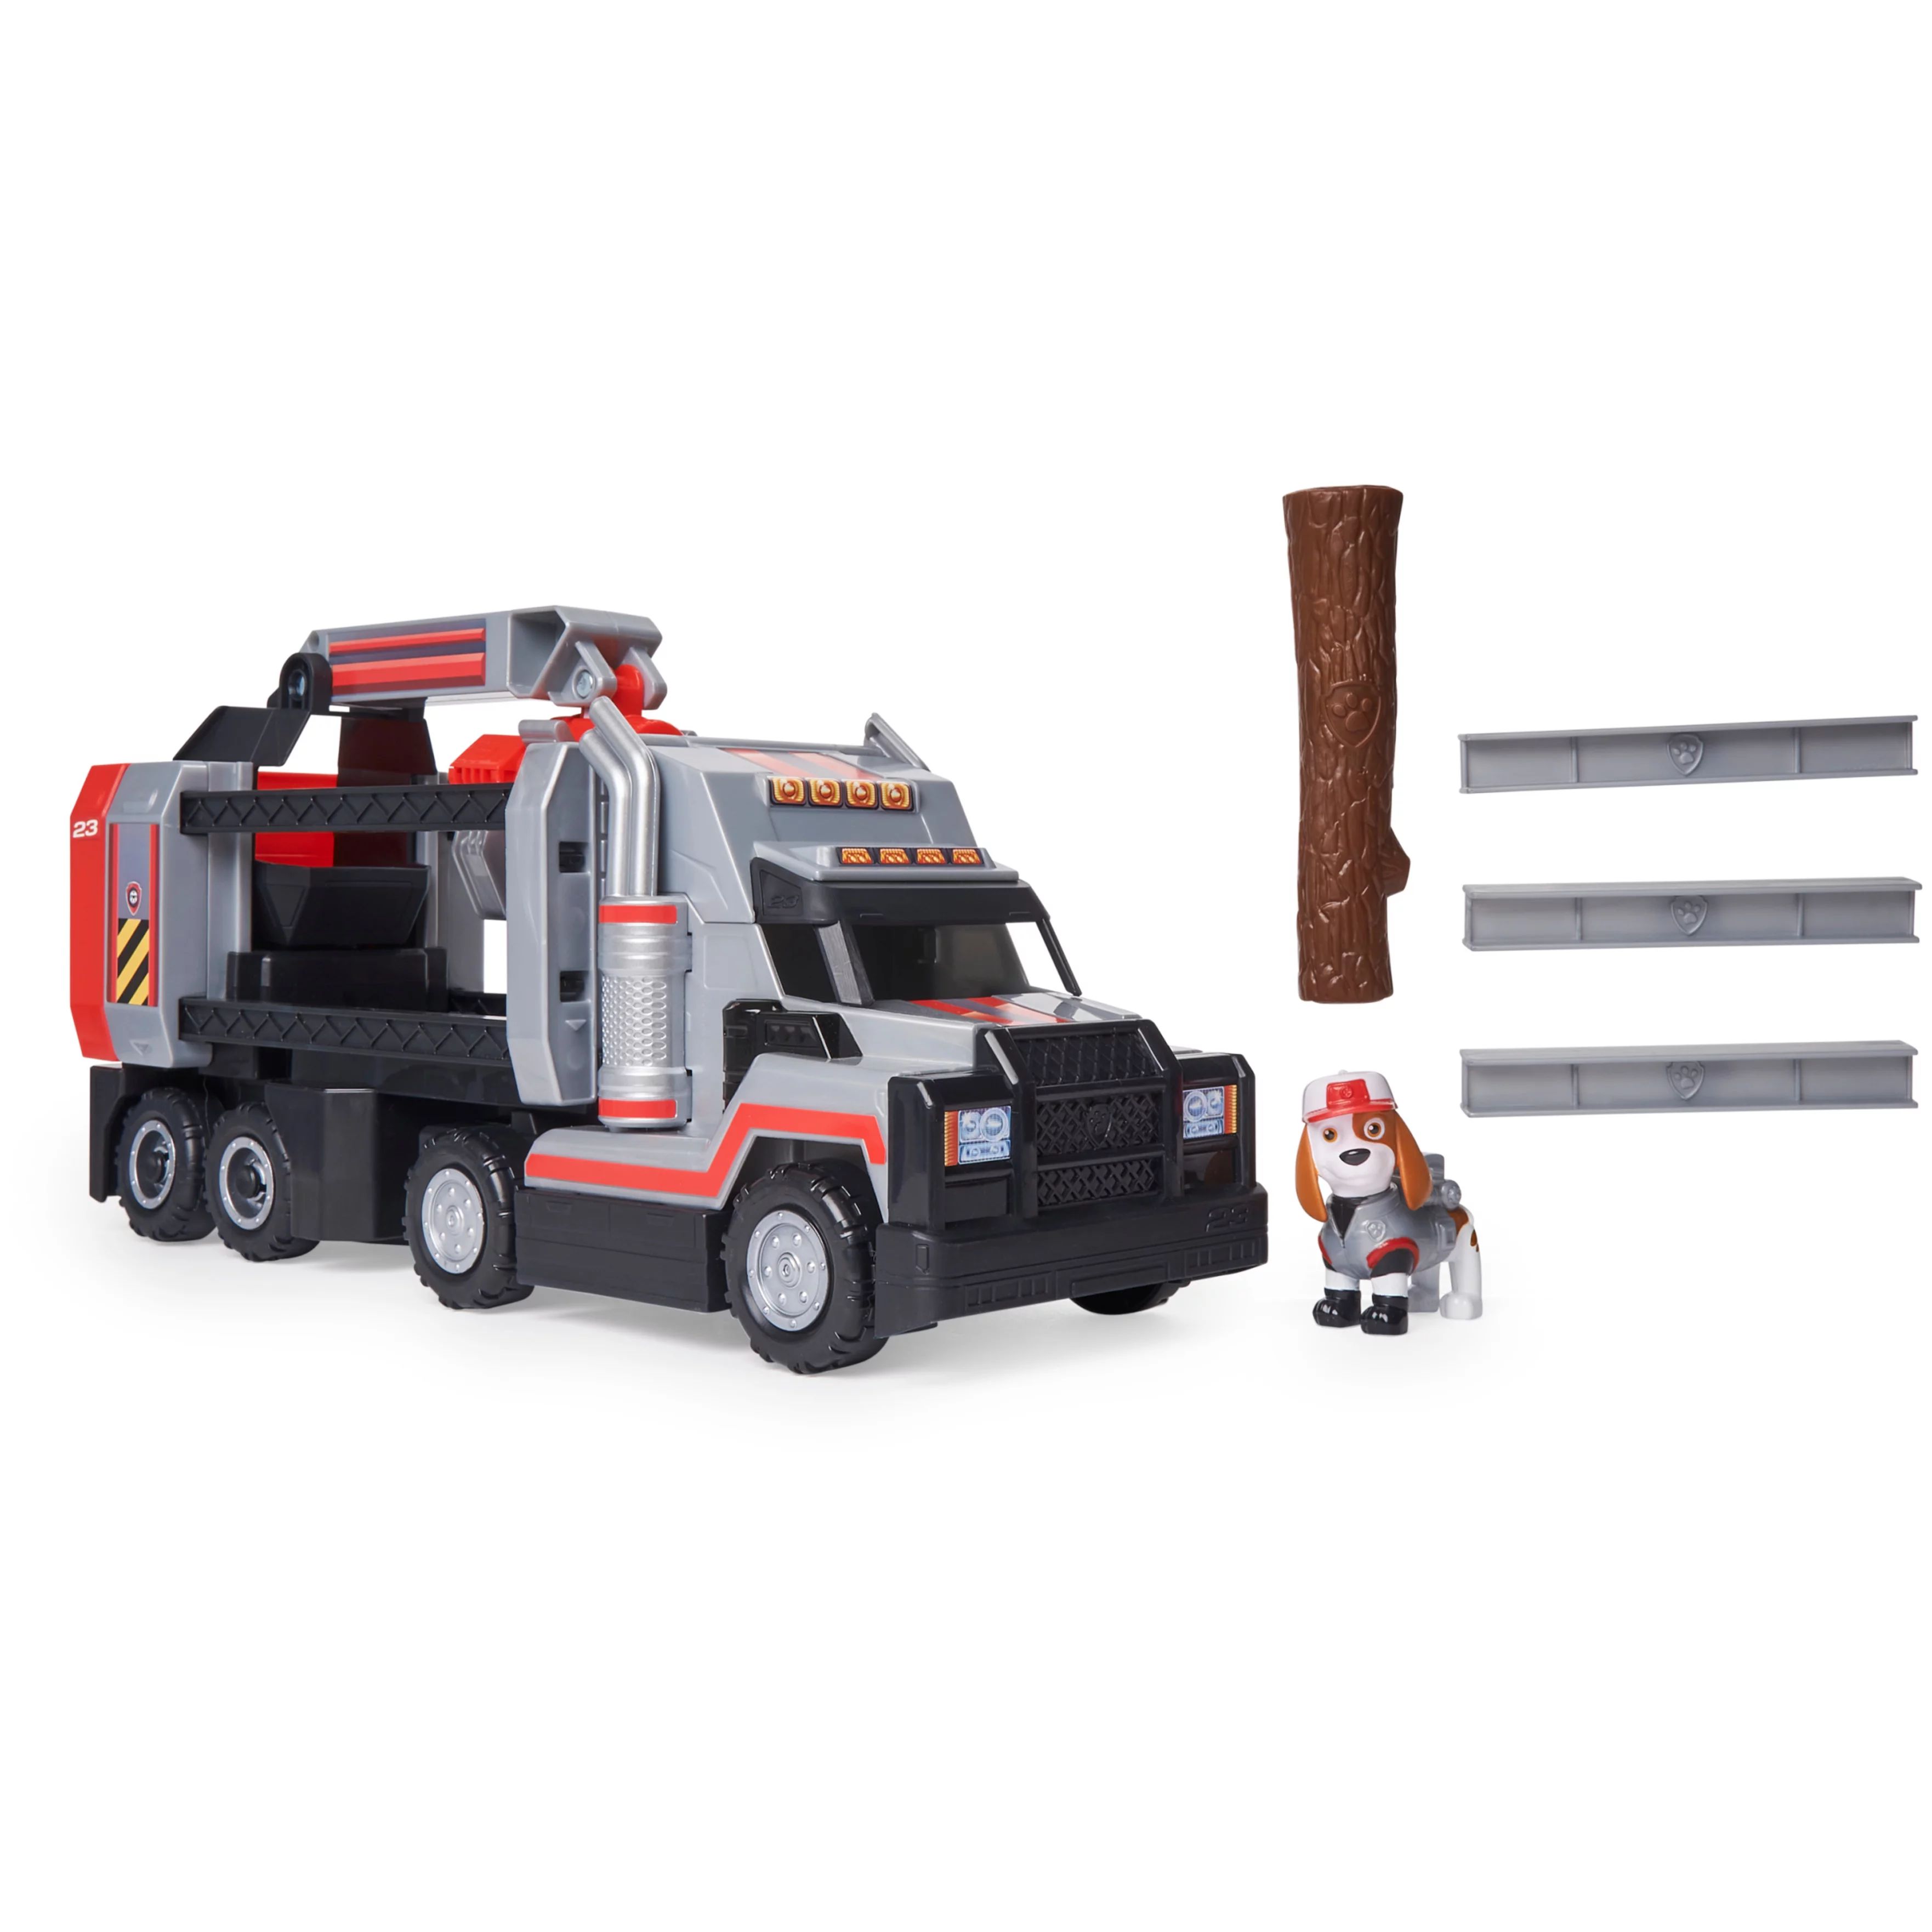 PAW Patrol, Al’s Deluxe Big Truck Toy with Moveable Claw Arm and Accessories | Walmart (US)